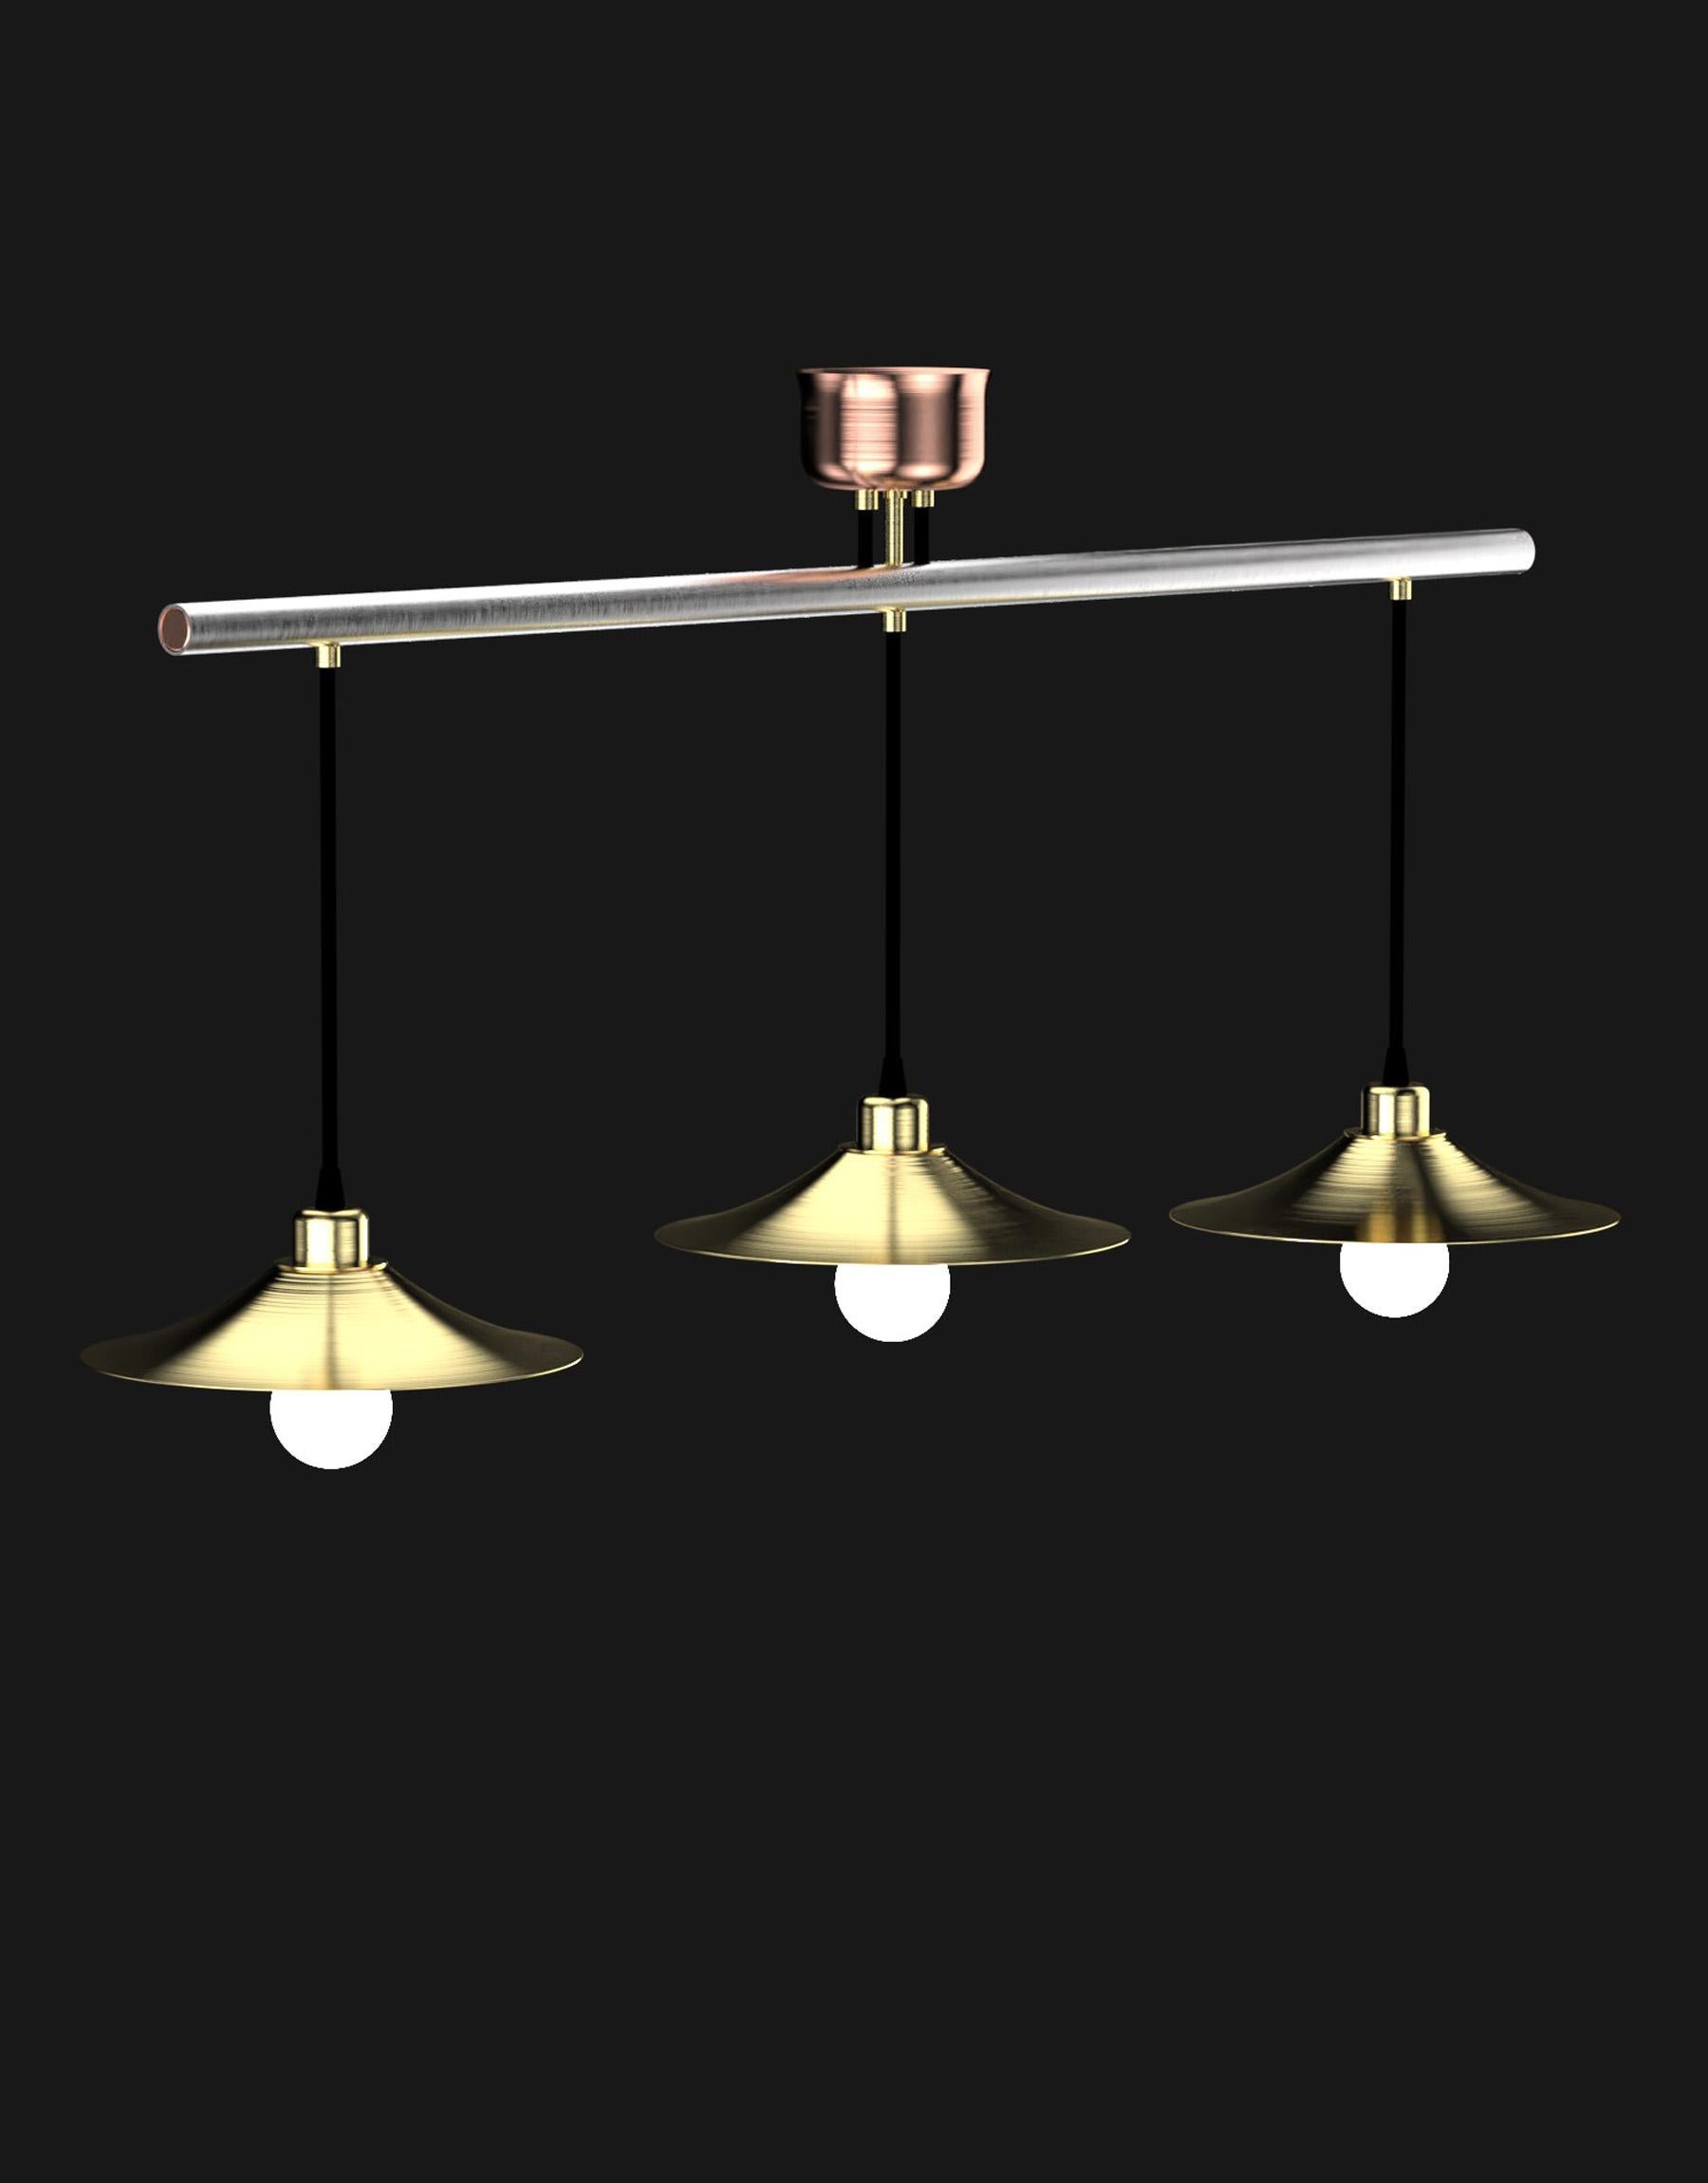 Made from genuine copper and 304L stainless steel, this luminaire is our interpretation of an industrial pendant. The elegance of the raw material is omnipresent in the stainless steel tubes and copper ceiling lights. A perfect blend of elegance and